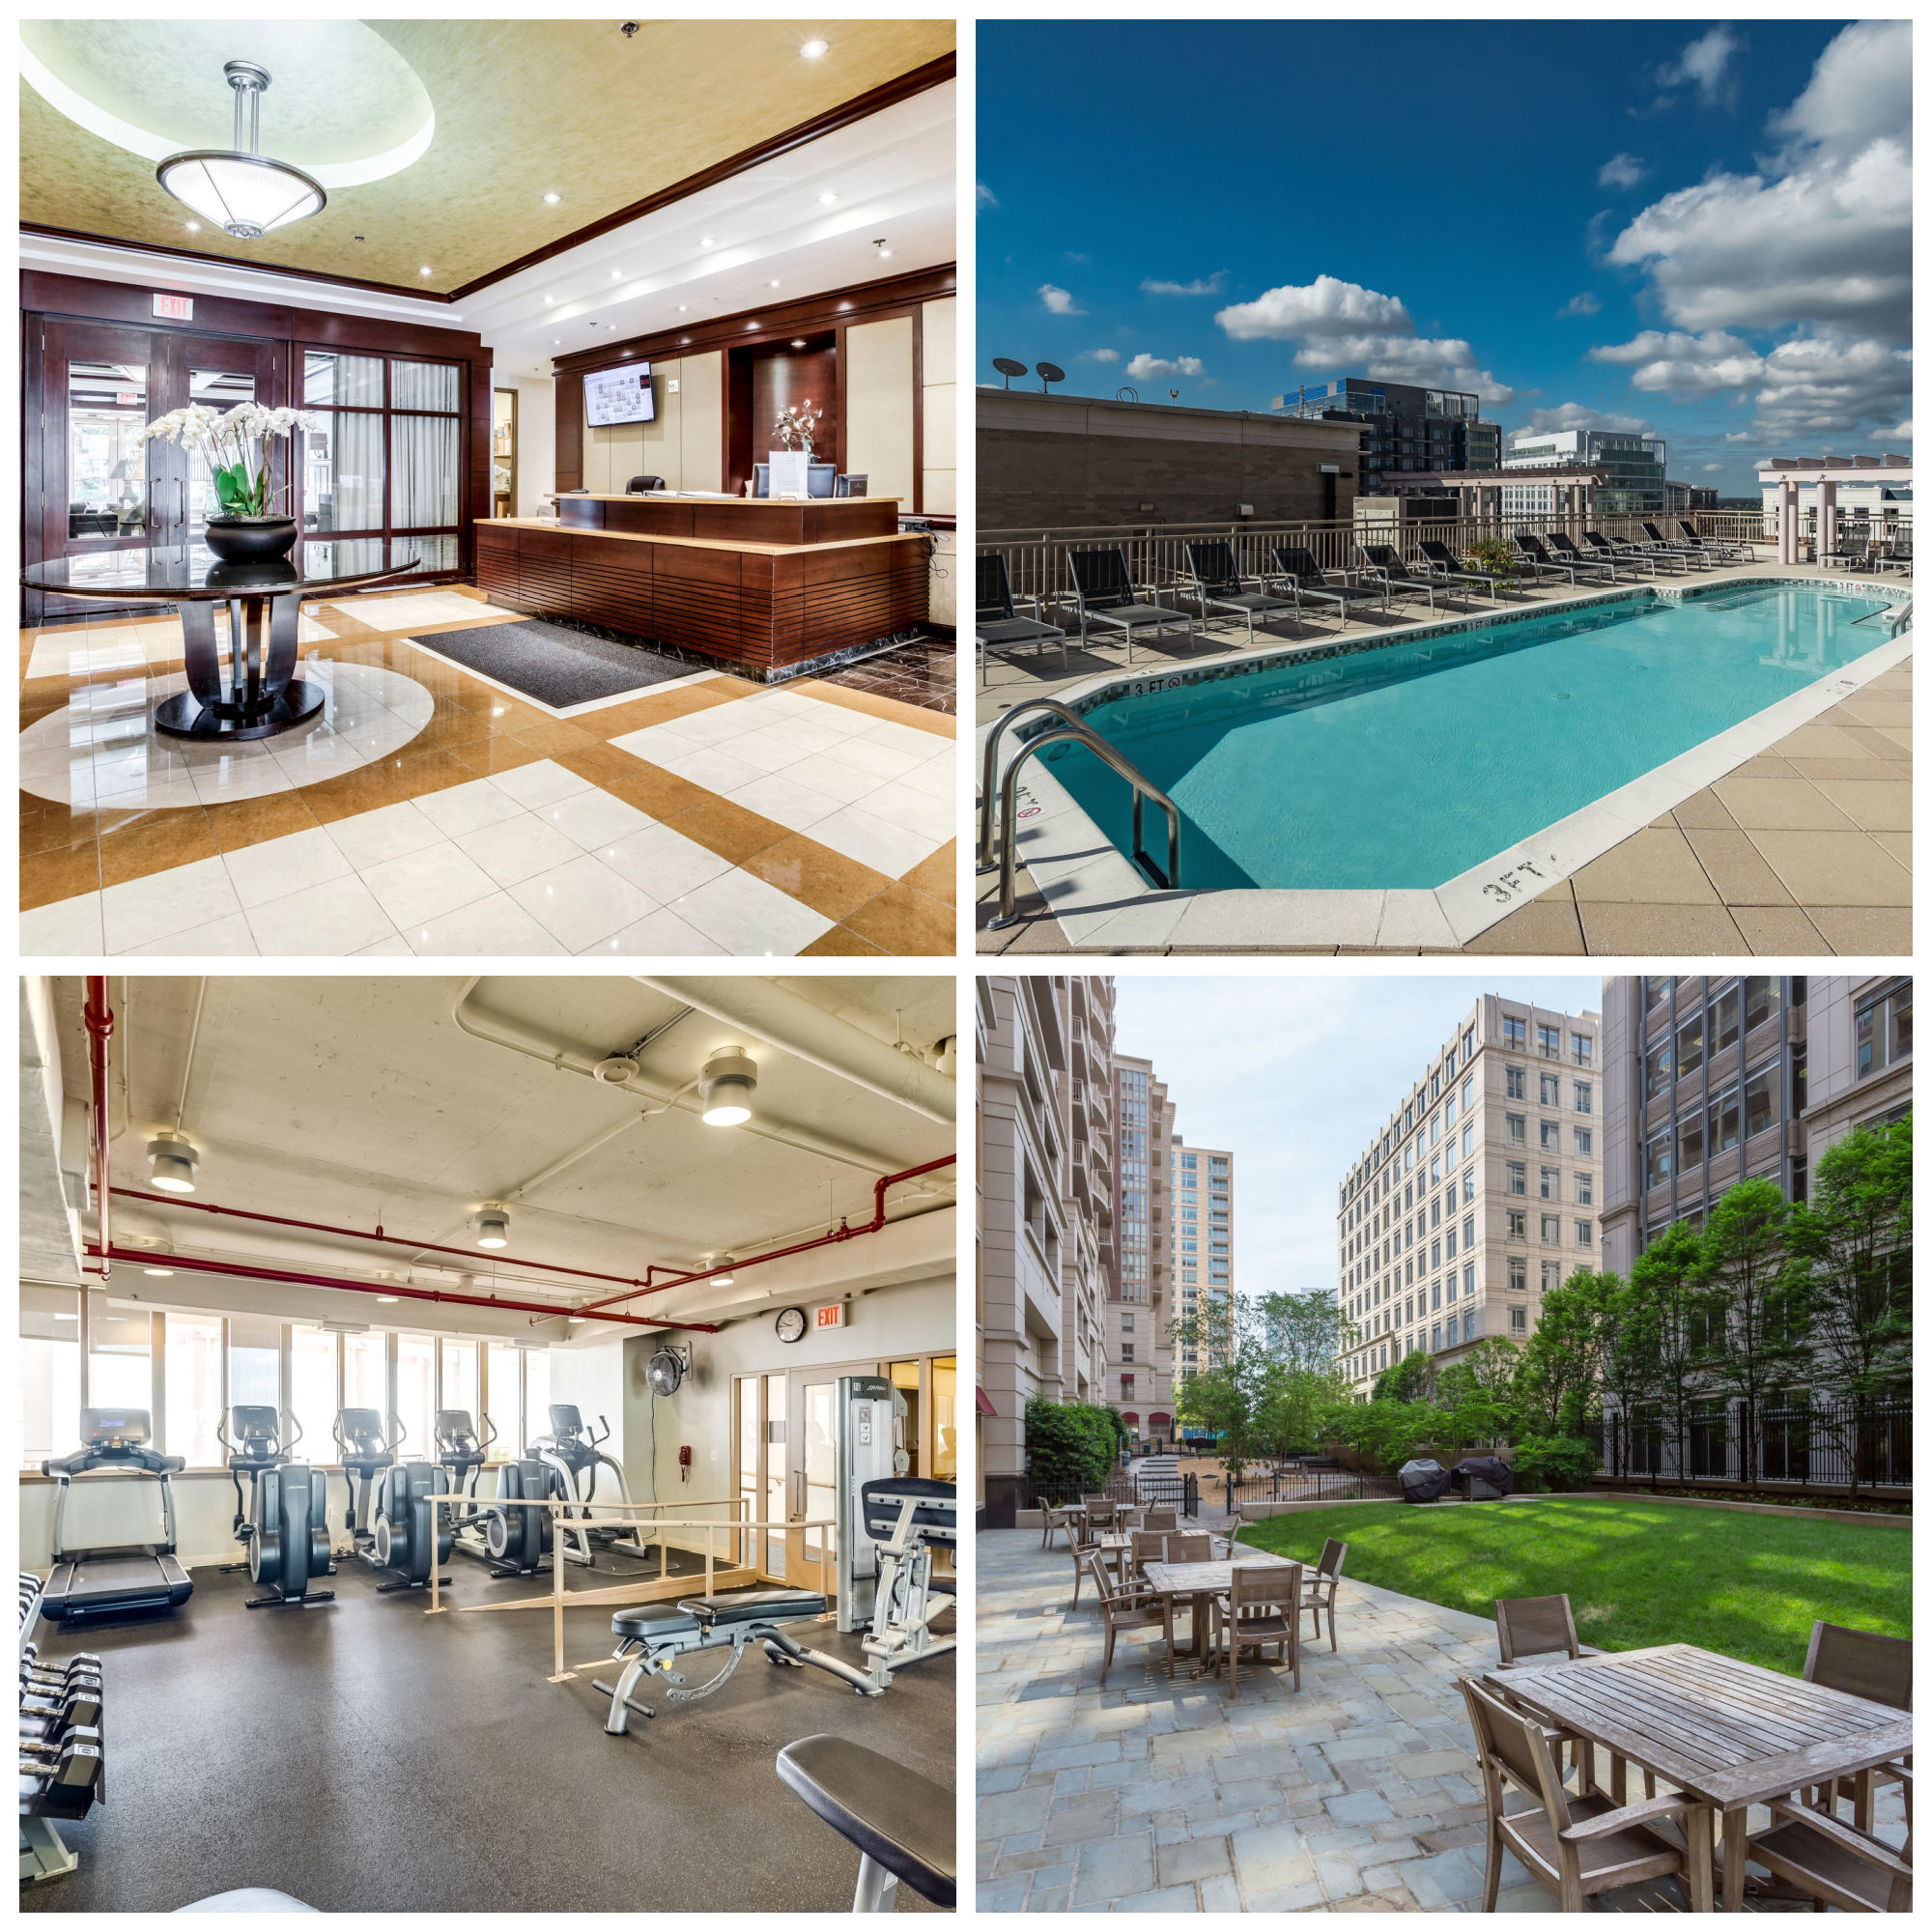 888 Quincy St #509 Alexandria-24hr Concierge, Roof-top Pool and deck, Fitness center, Private courtyard and club room